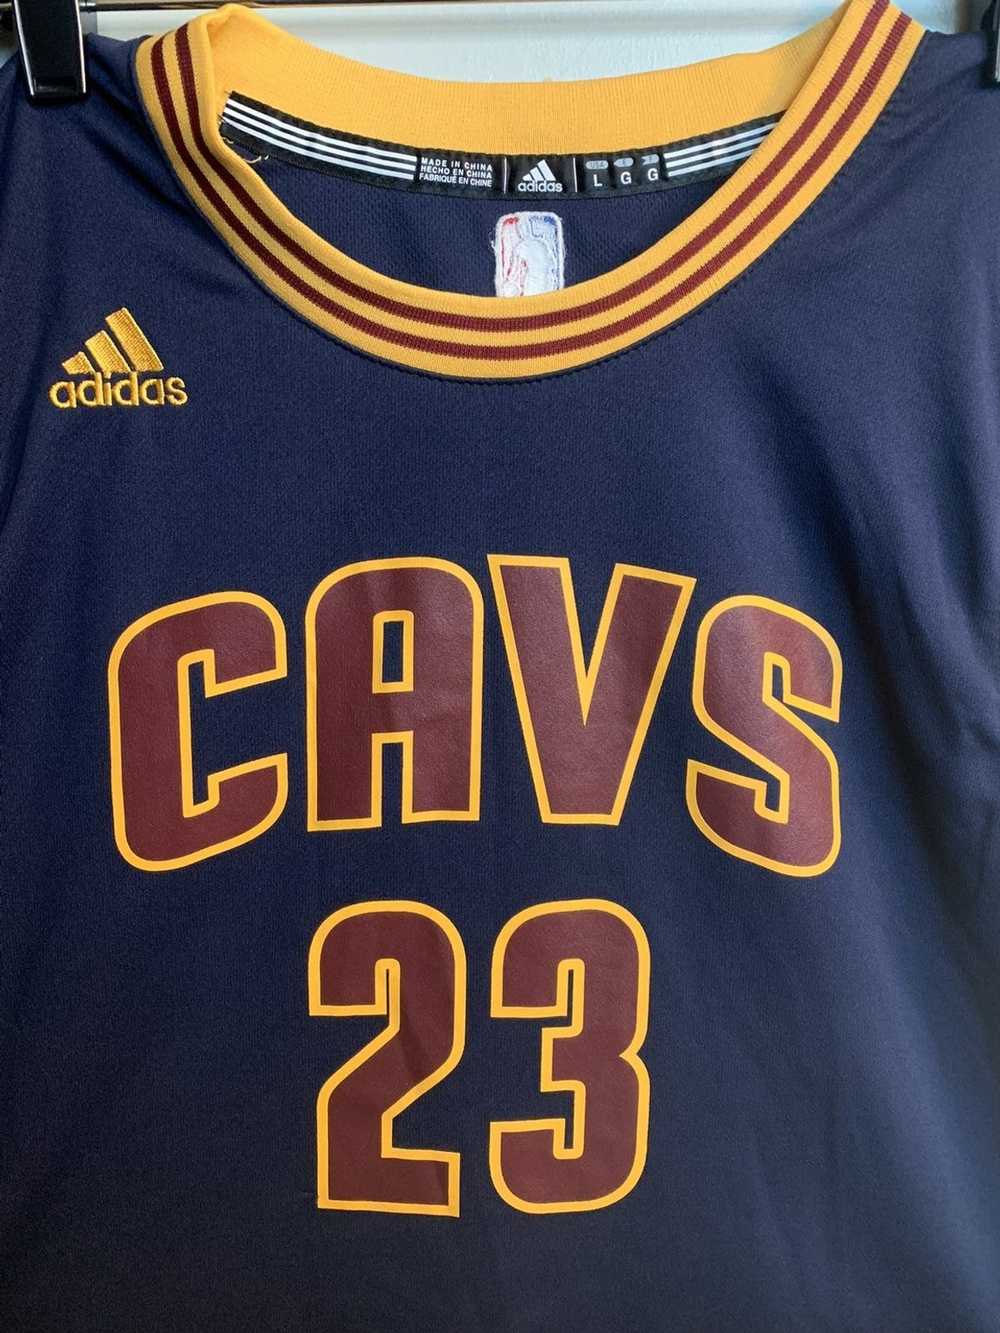 Lebron James Cavs Youth XL Jersey Adidas NBA Cleveland Cavaliers #23 Blue